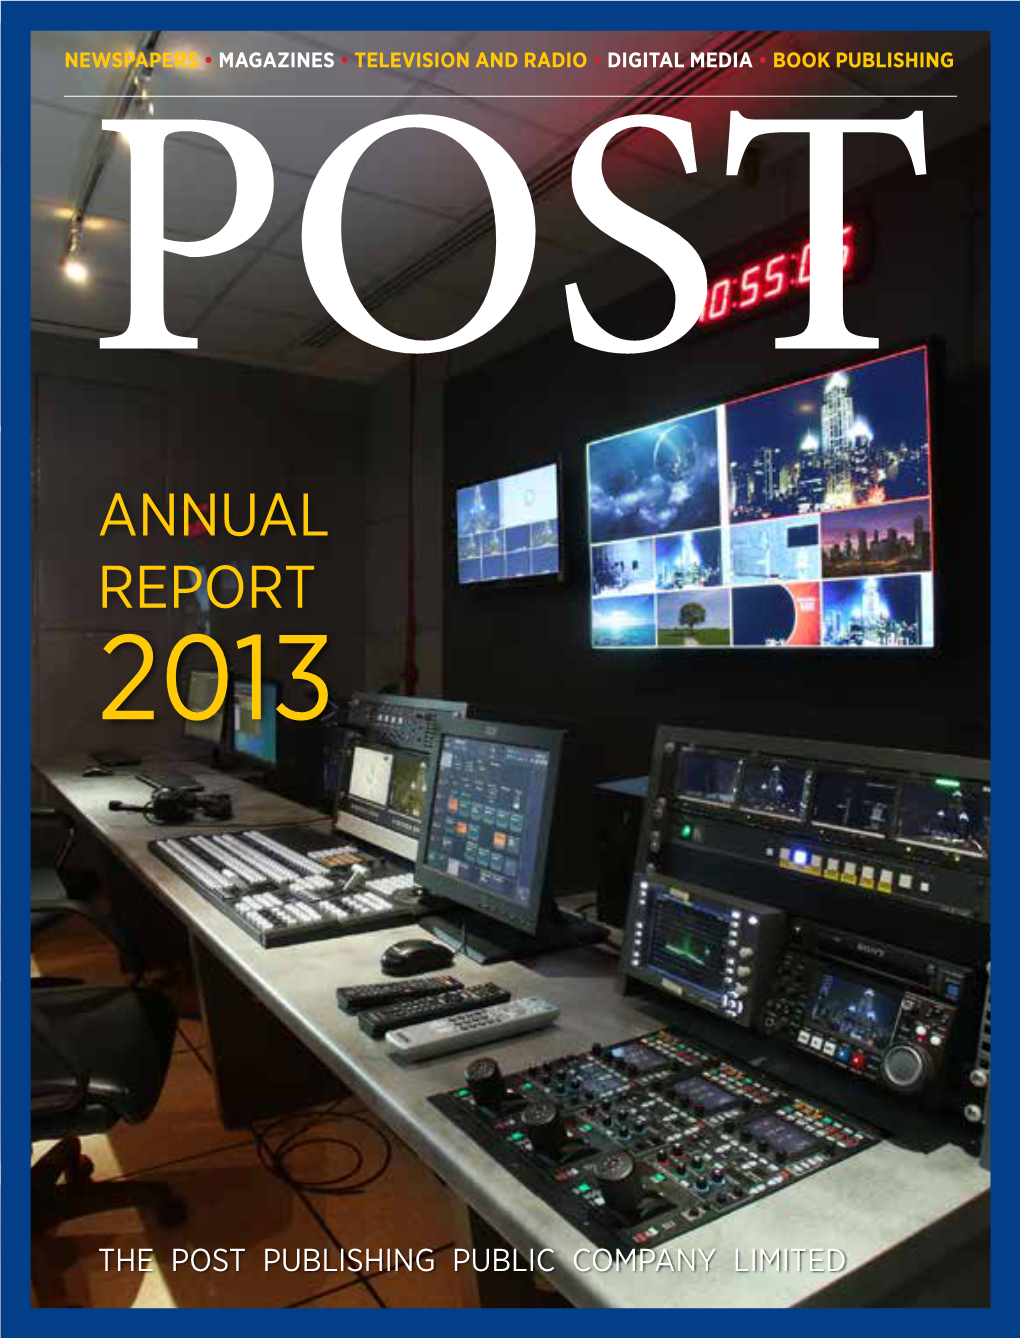 The Post Publishing Public Company Limited | Annual Report 2013